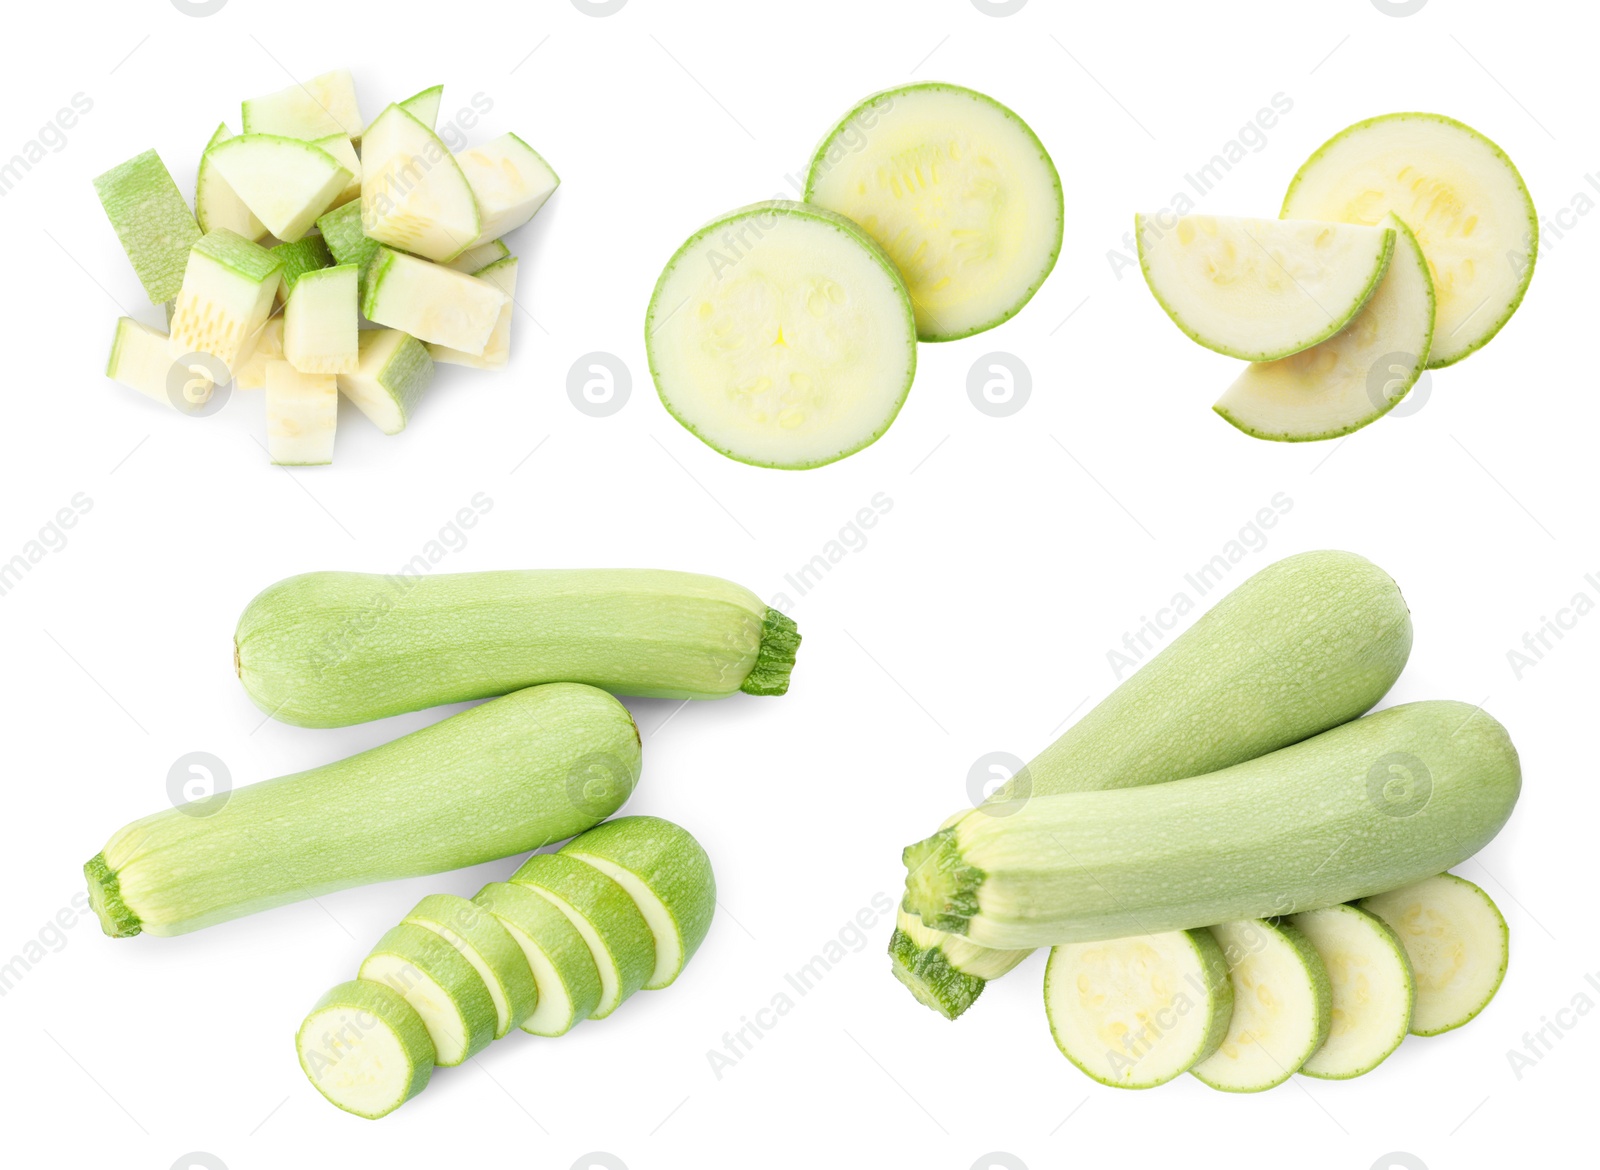 Image of Set of whole and cut squashes on white background, top view